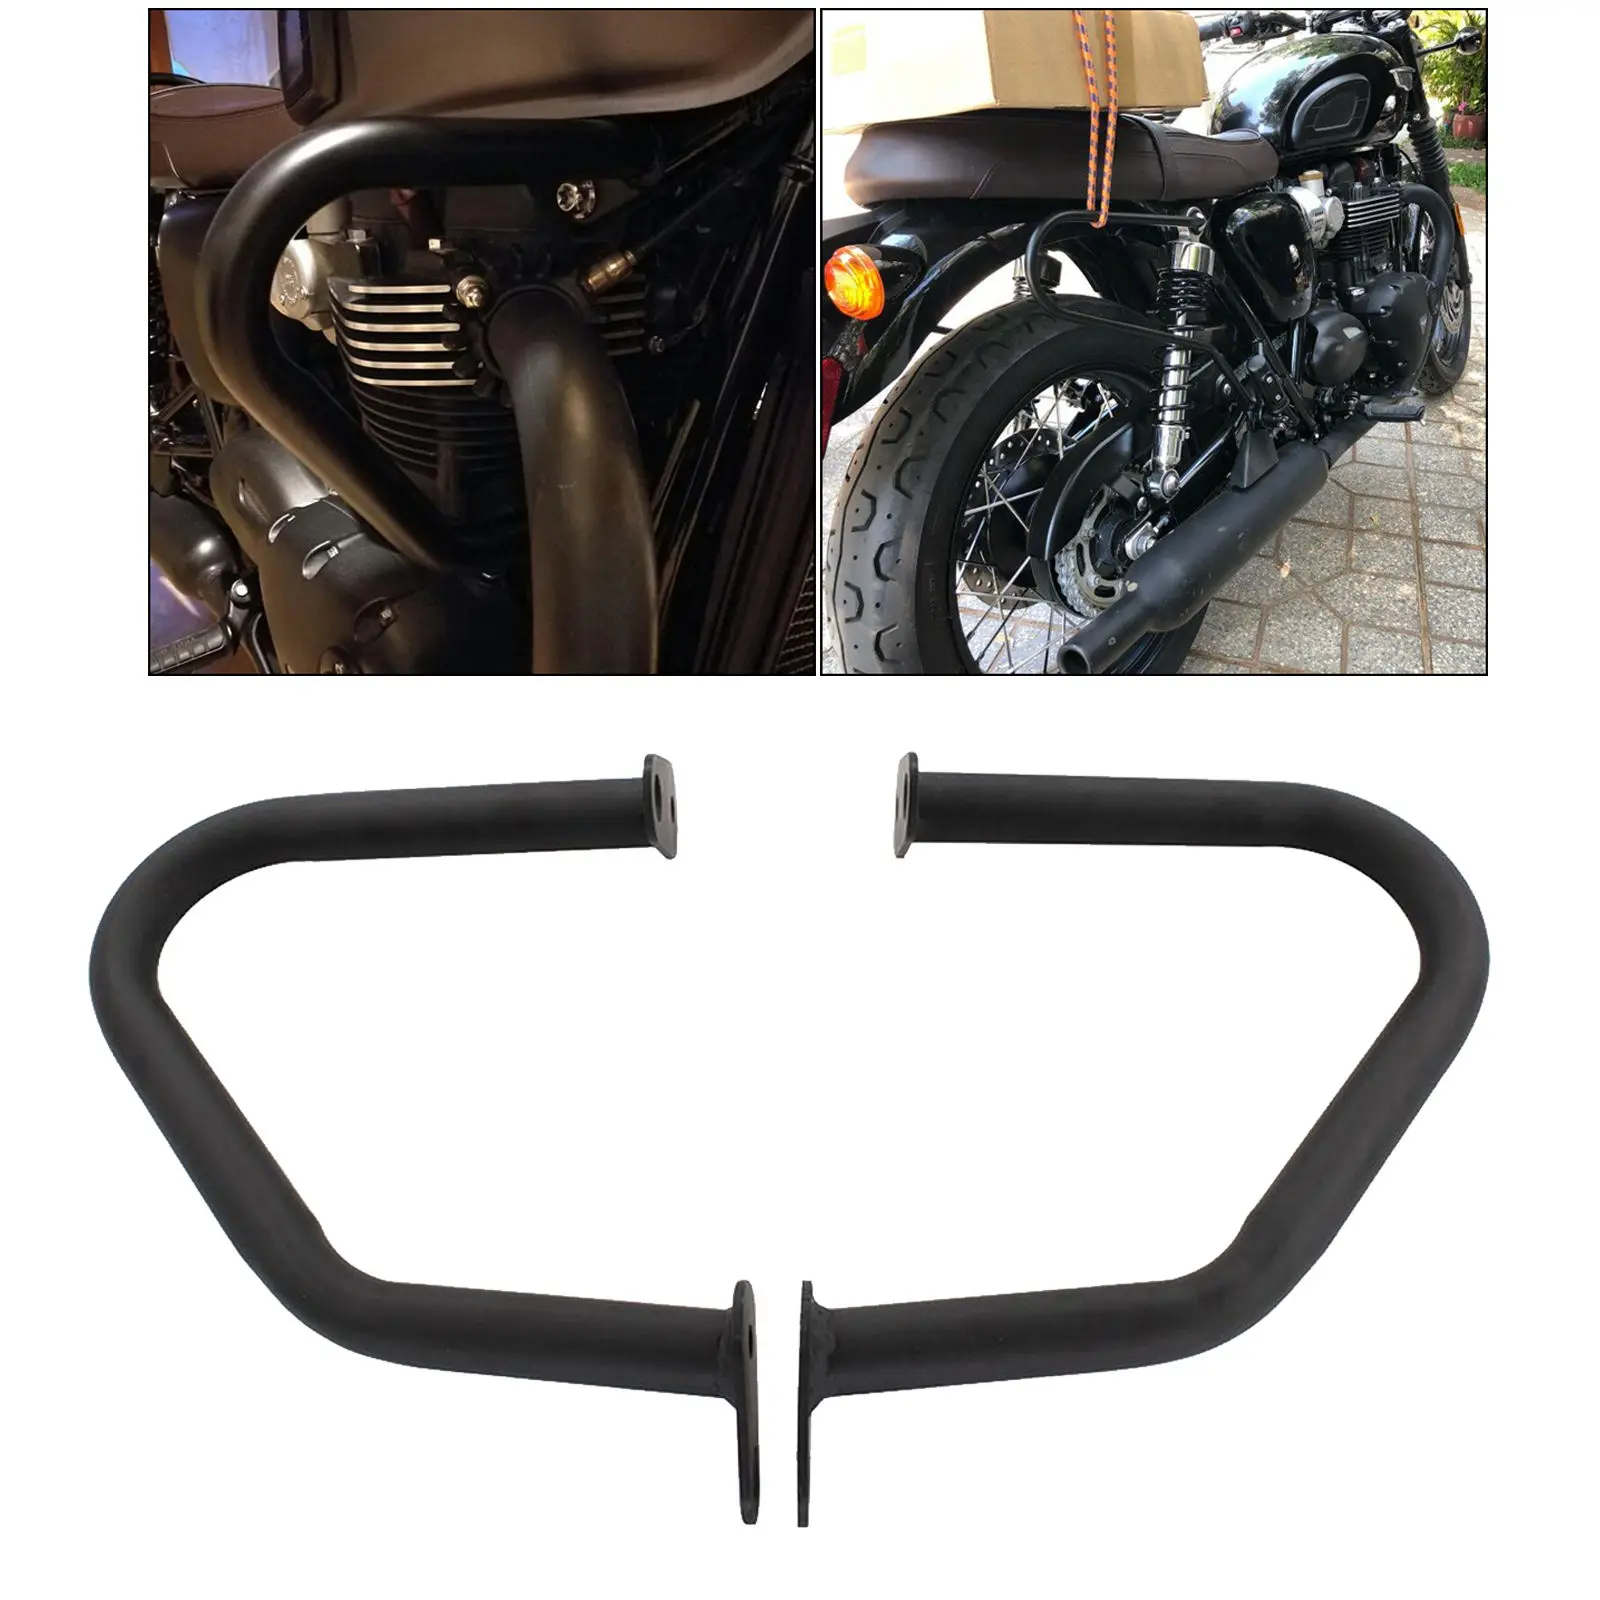 1pair Black Motorcycle Engine Guard Crash Bars For   T100 T120 16-19